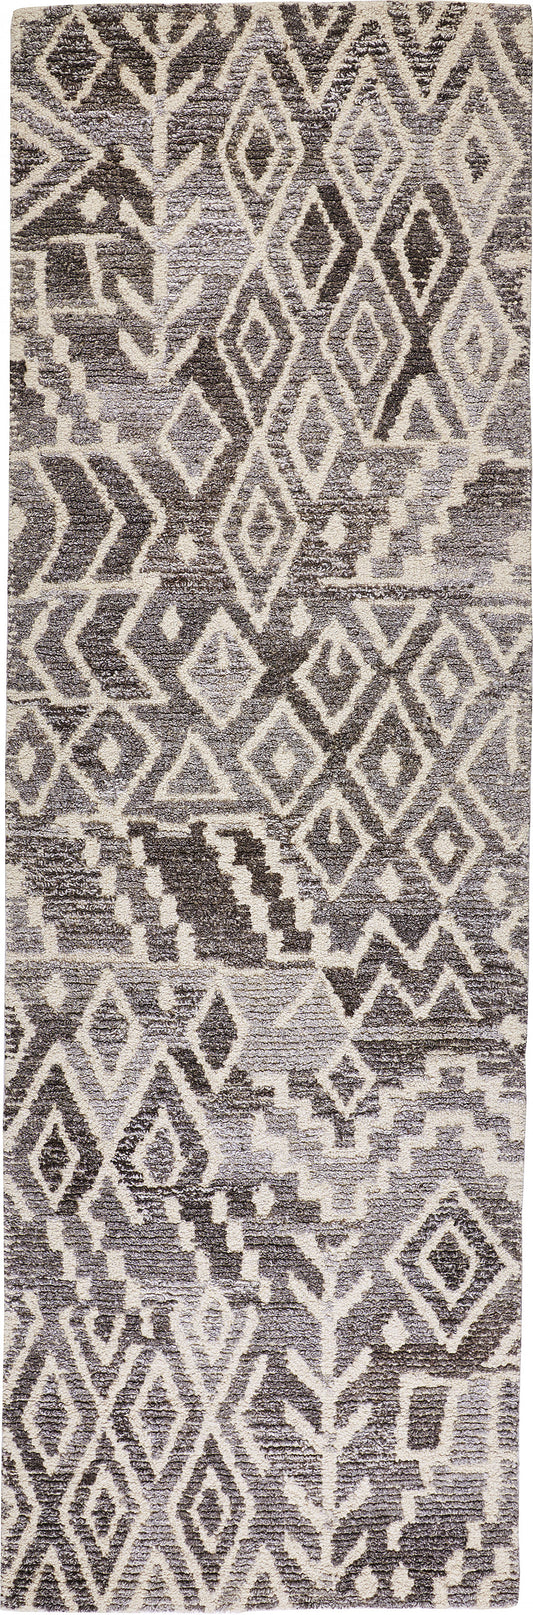 8' Runner Gray and White Wool Abstract Hand Tufted Runner Rug